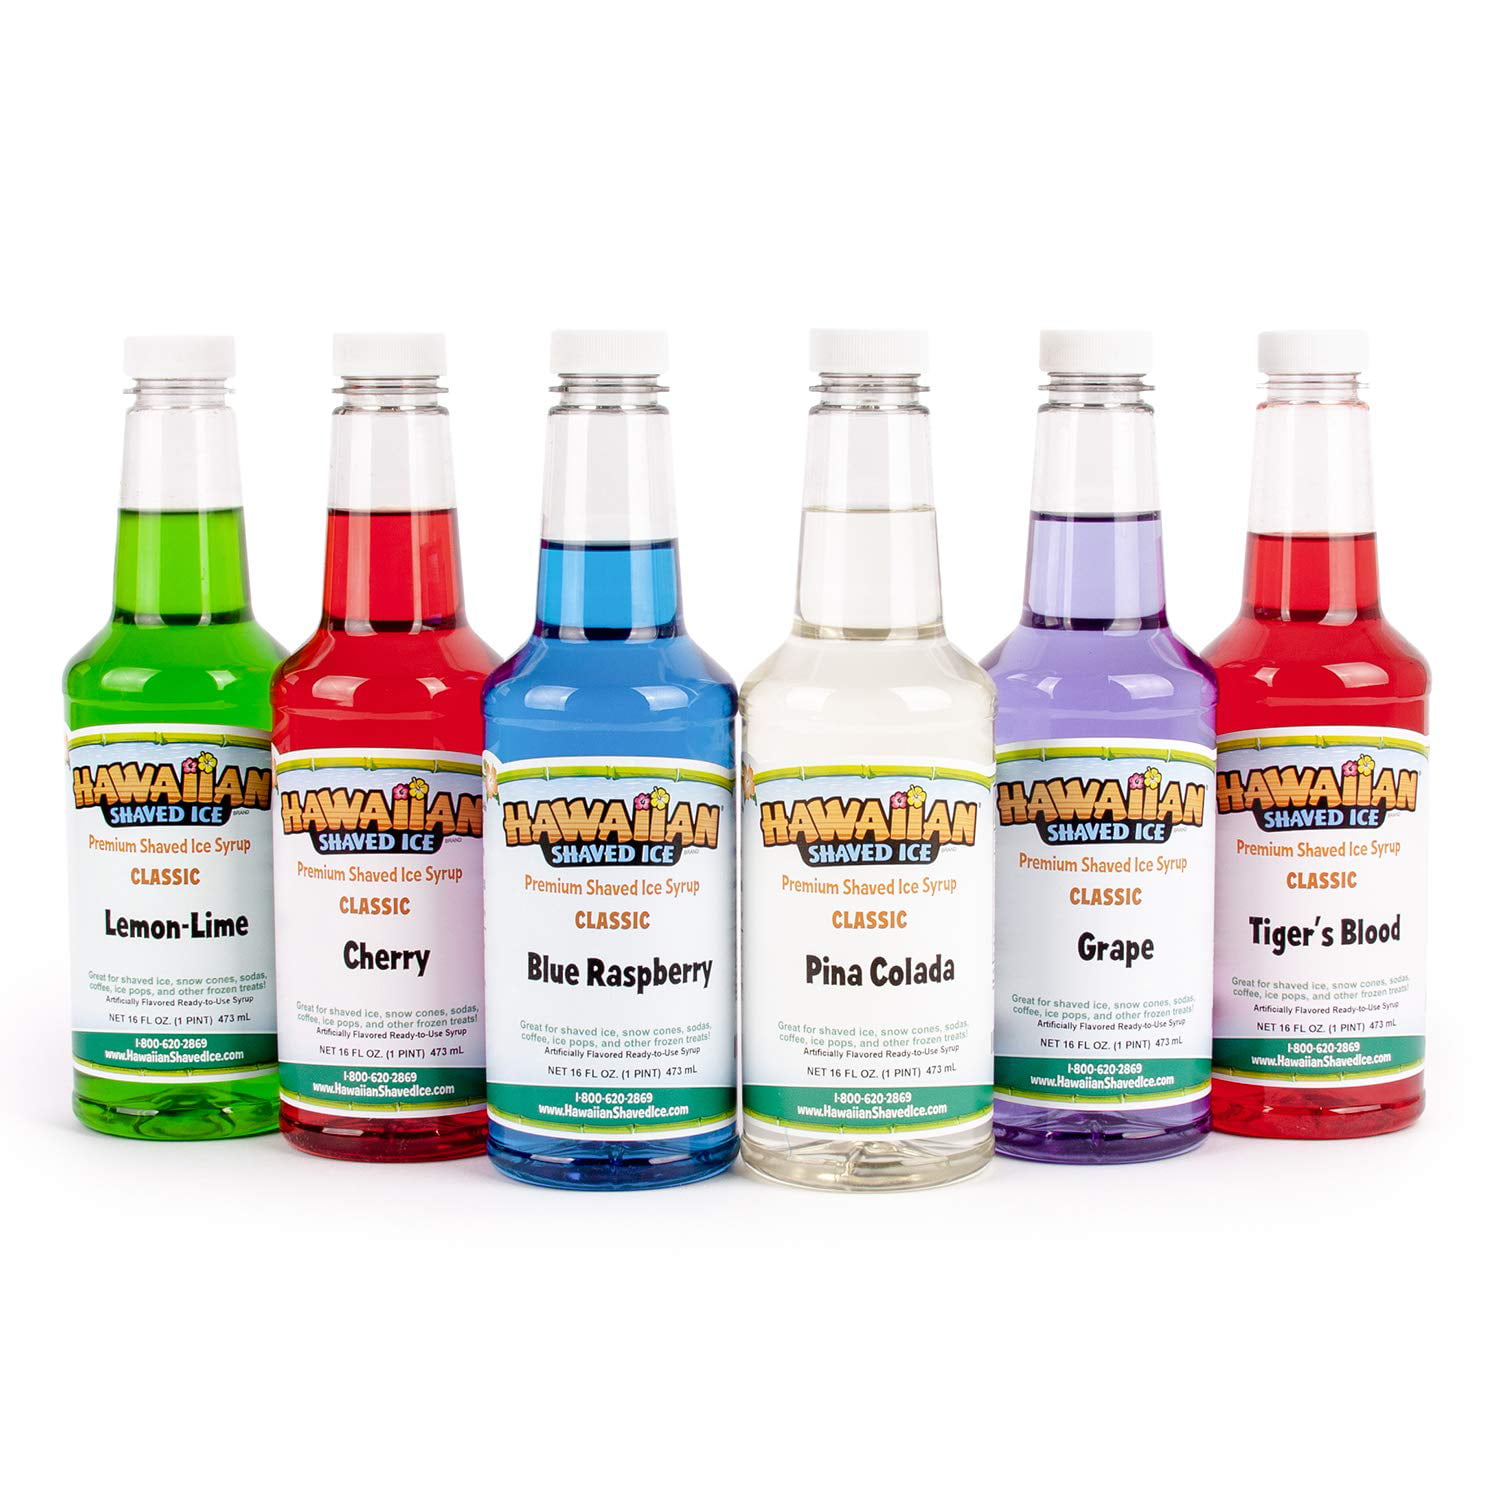 3 Pack Premium Shaved Ice Flavor and Snow Cone Flavored Syrup with Accessories 